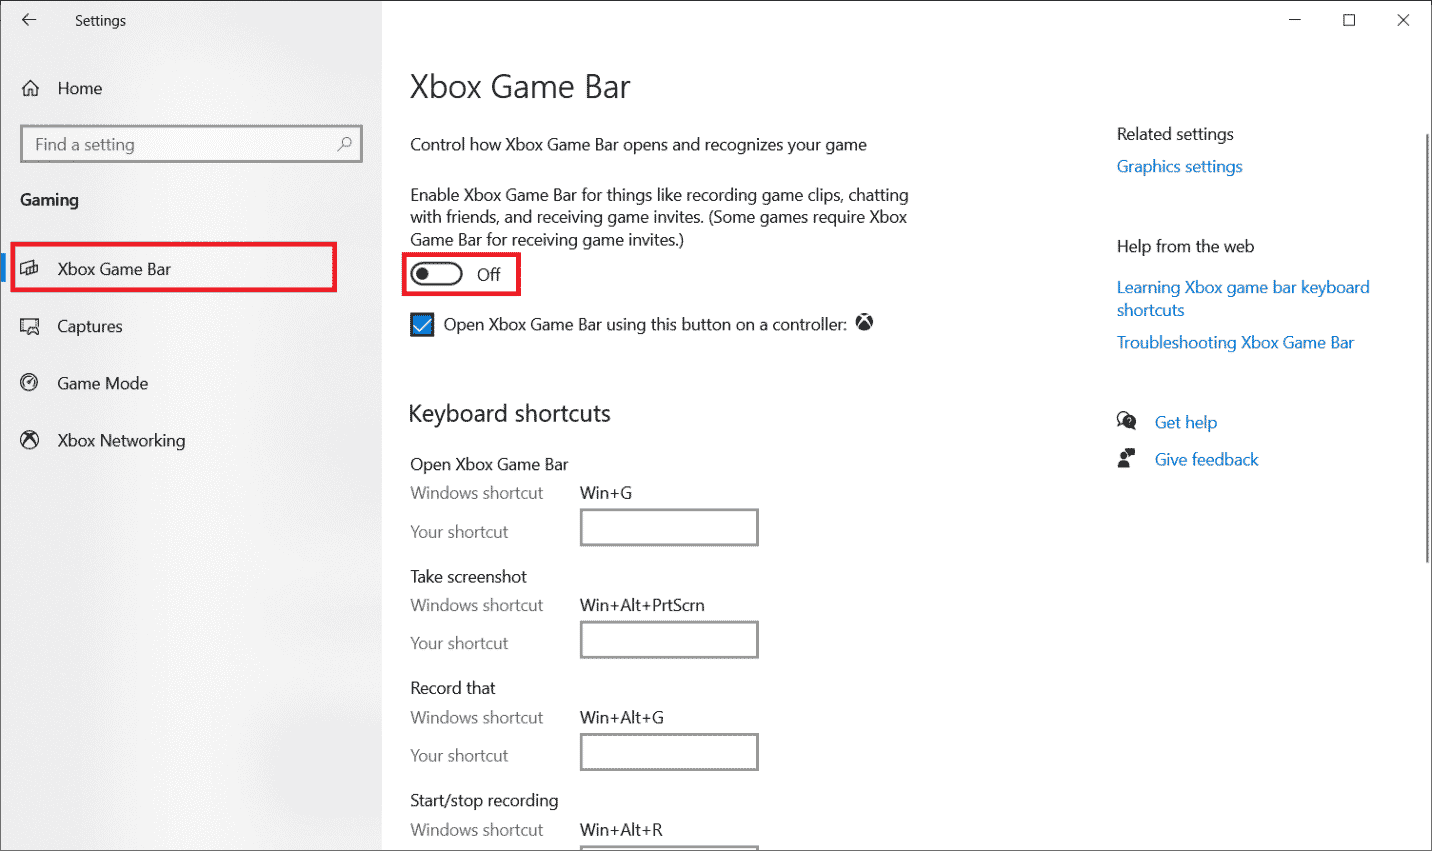 Toggle off Enable Xbox Game Bar for things like recording game clips, chatting with friends, and receiving game invites